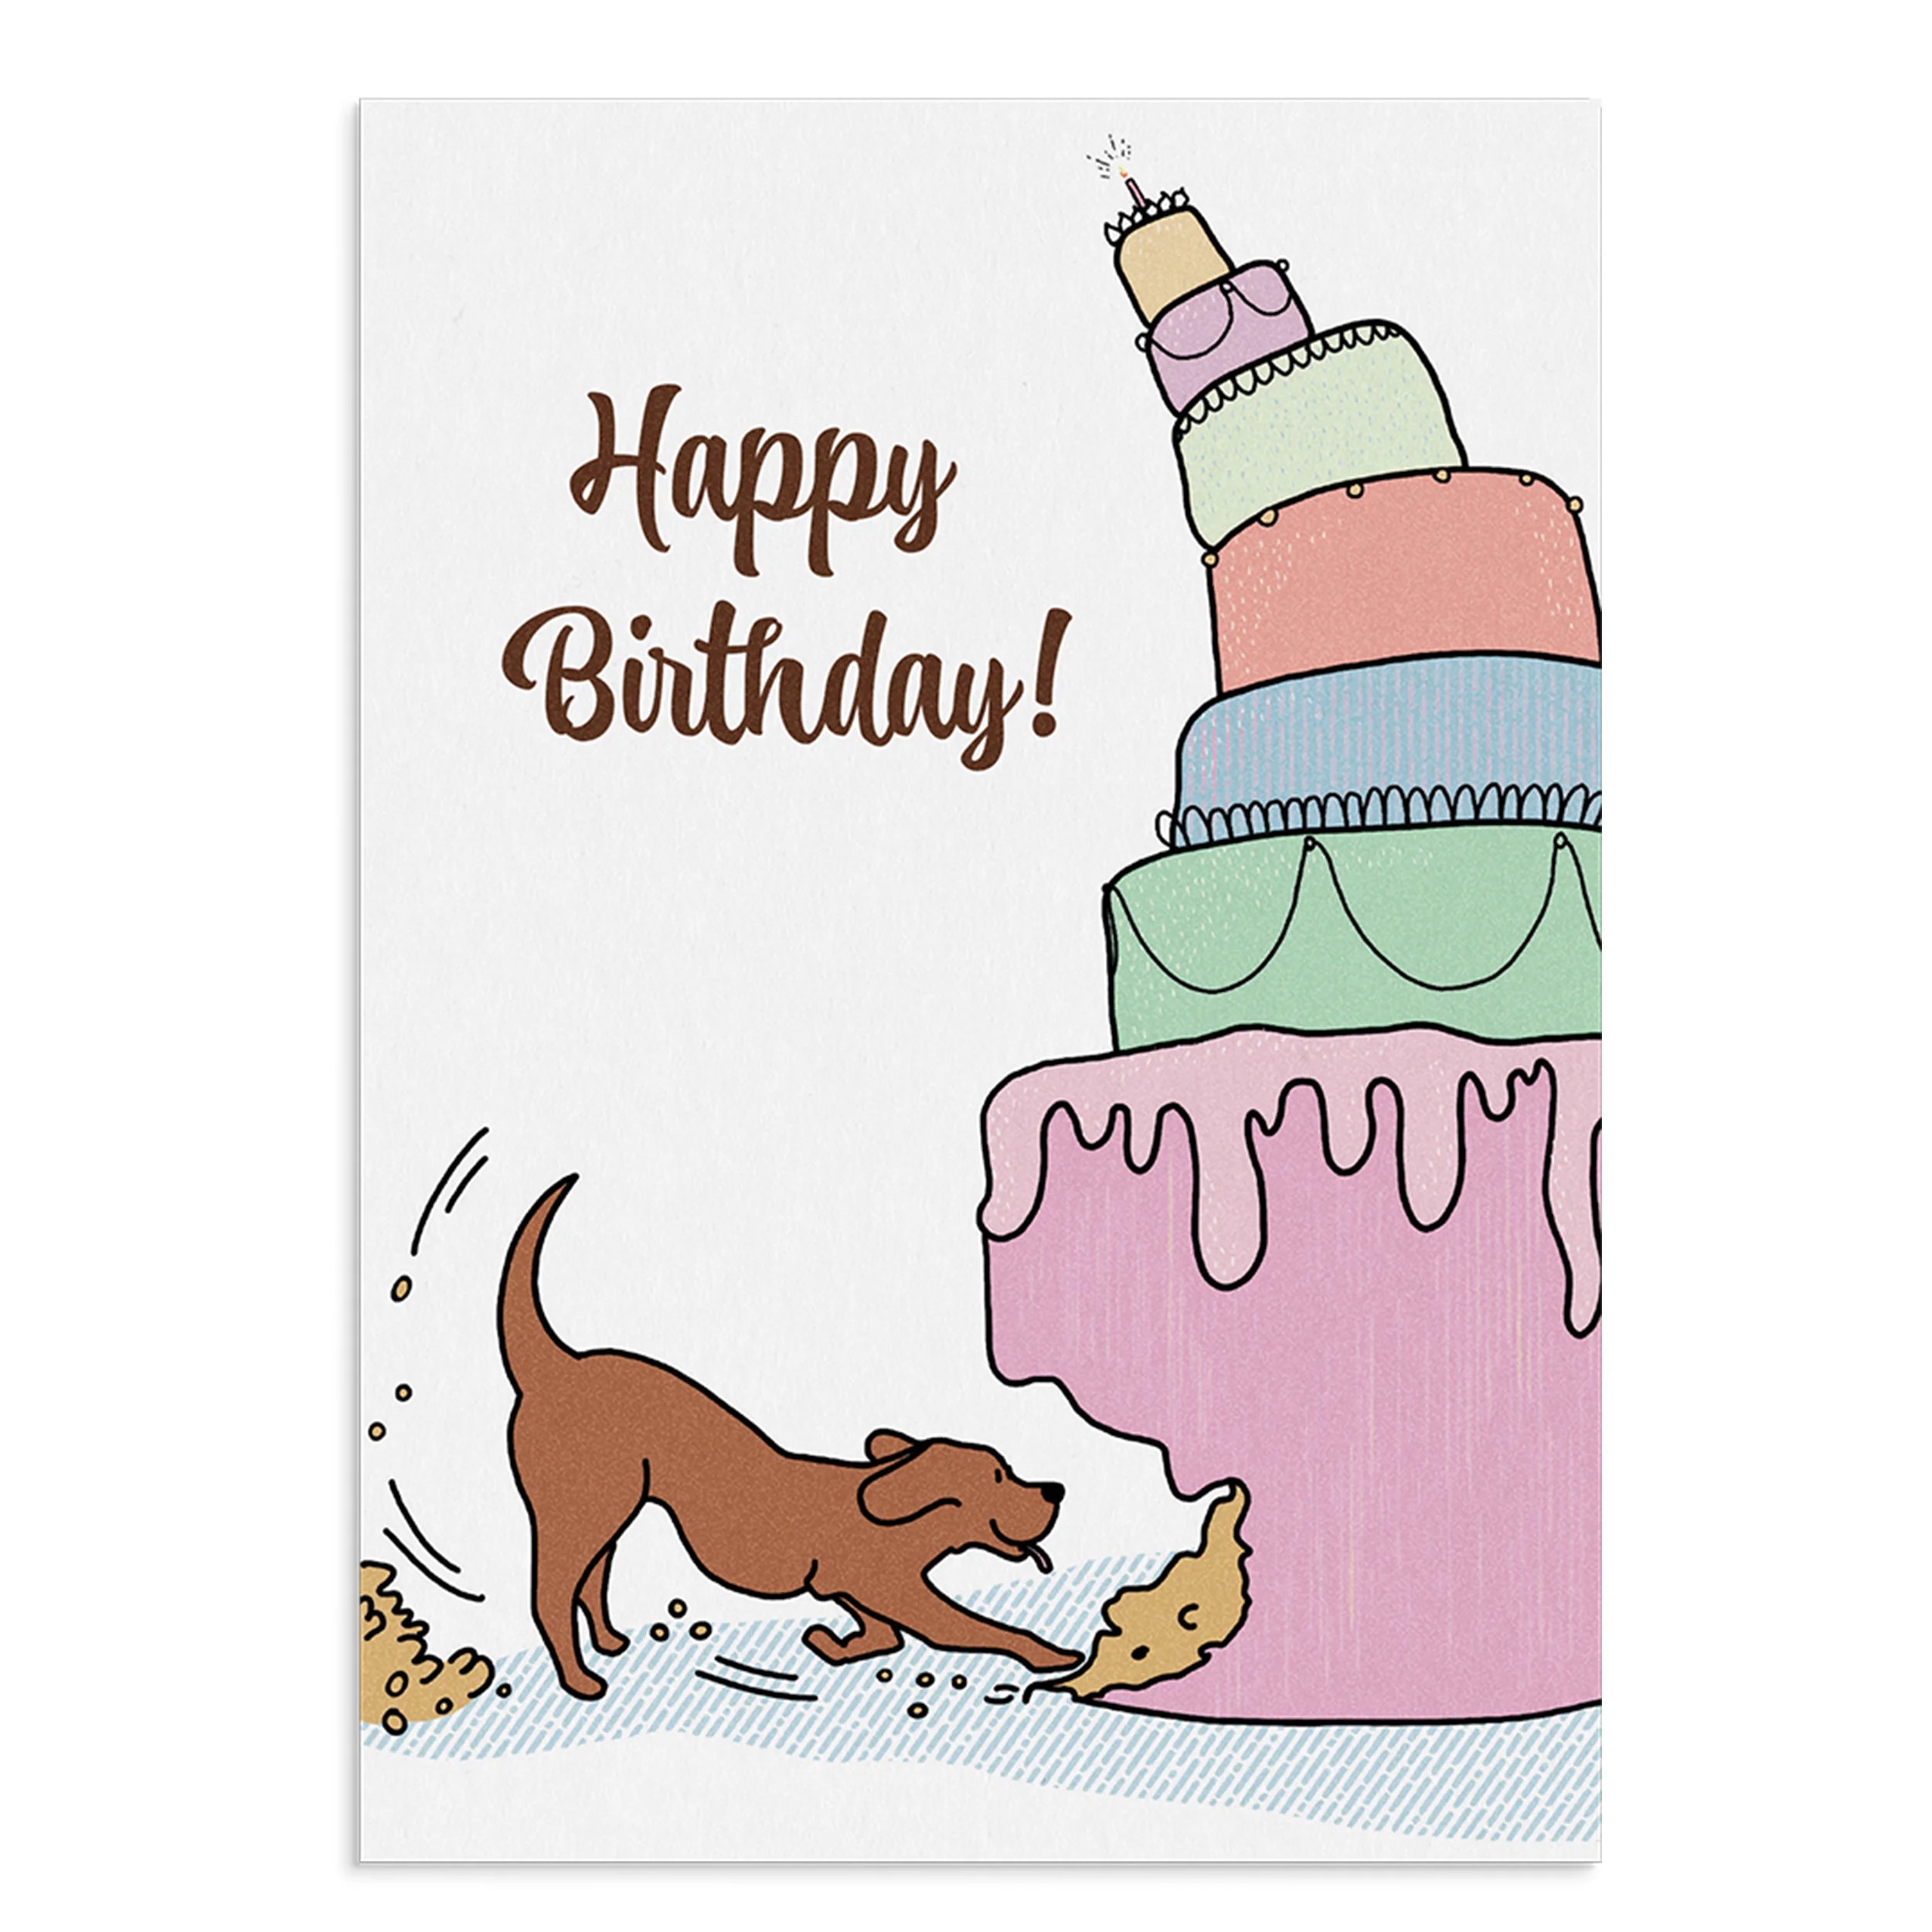 Poochie Post Edible Greeting Card For Dogs - Happy Birthday Giant Cake